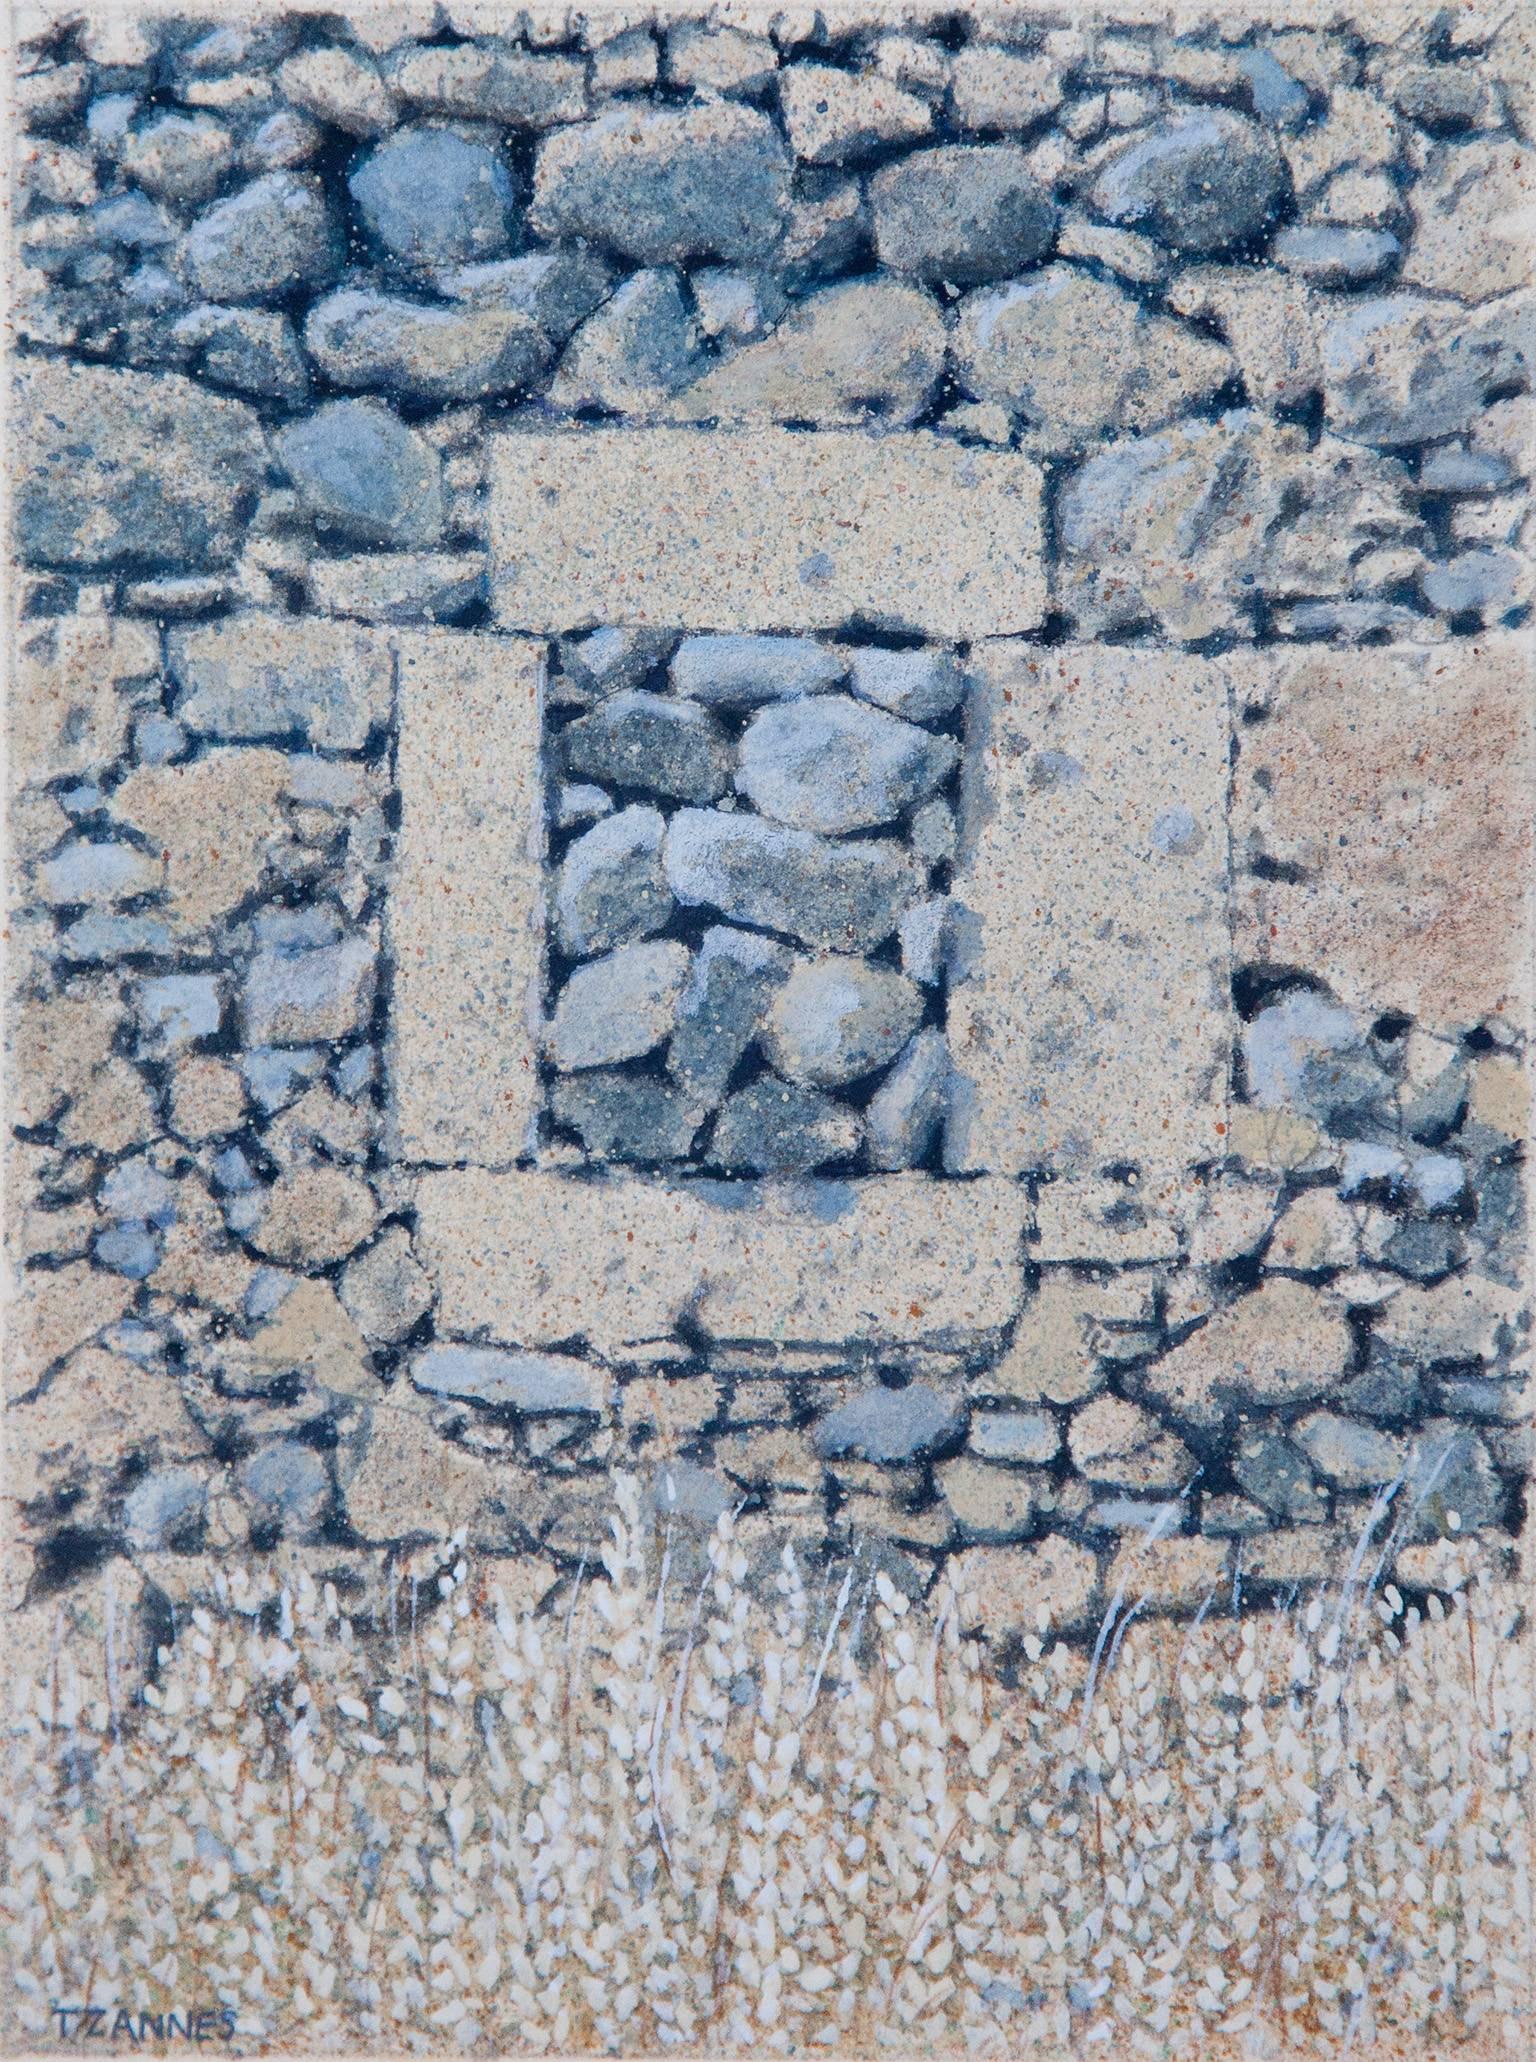 George Tzannes Landscape Painting - Ancient Rock Wall with Stone-filled Window - Figurative Painting of Greek Wall